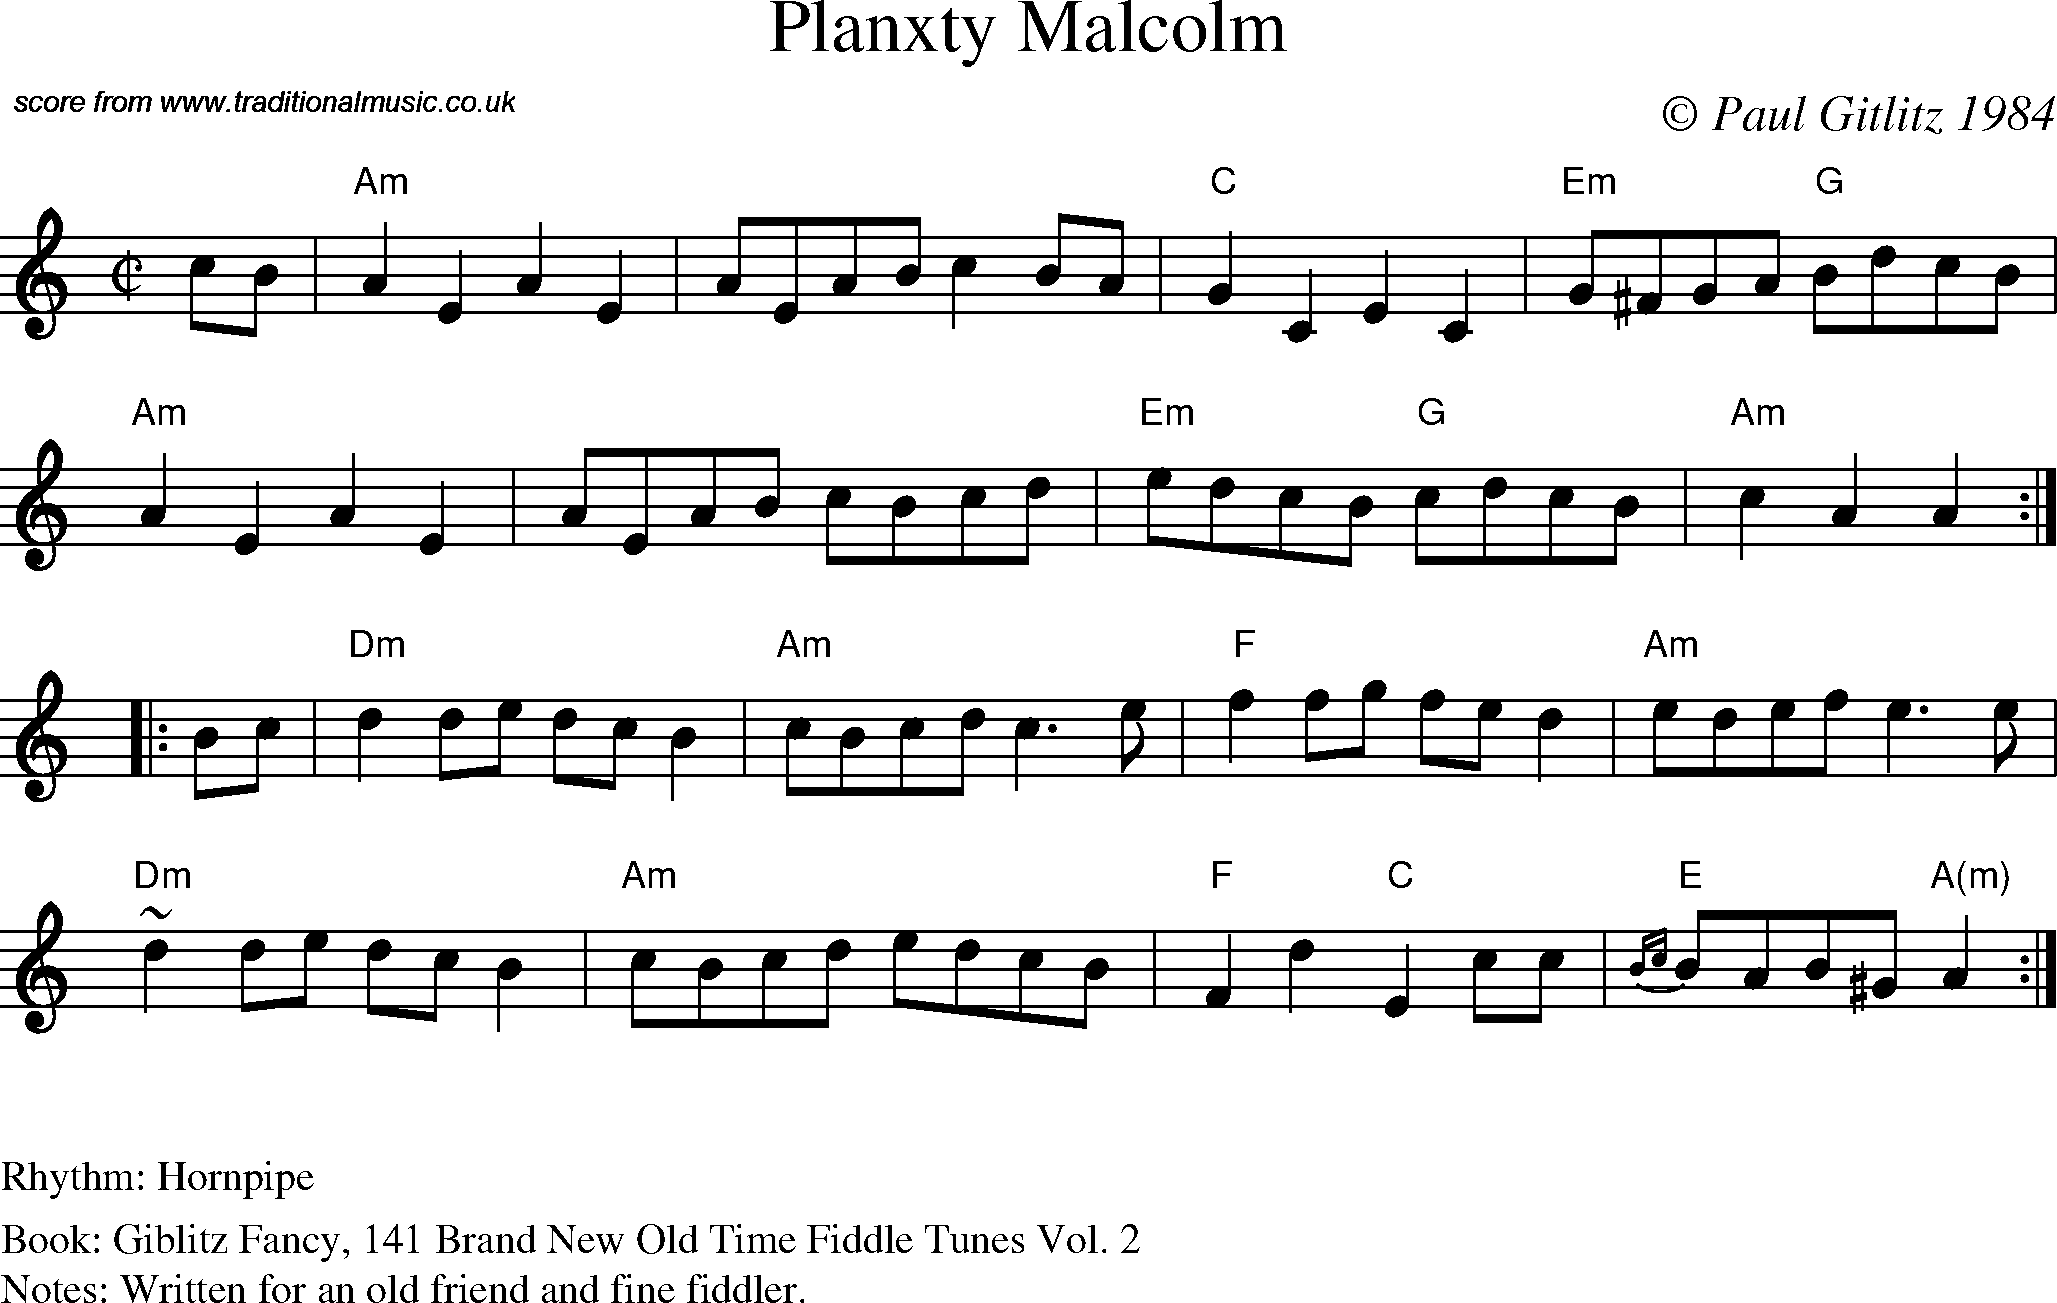 Sheet Music Score for Hornpipe/Strathspey - Planxty Malcolm